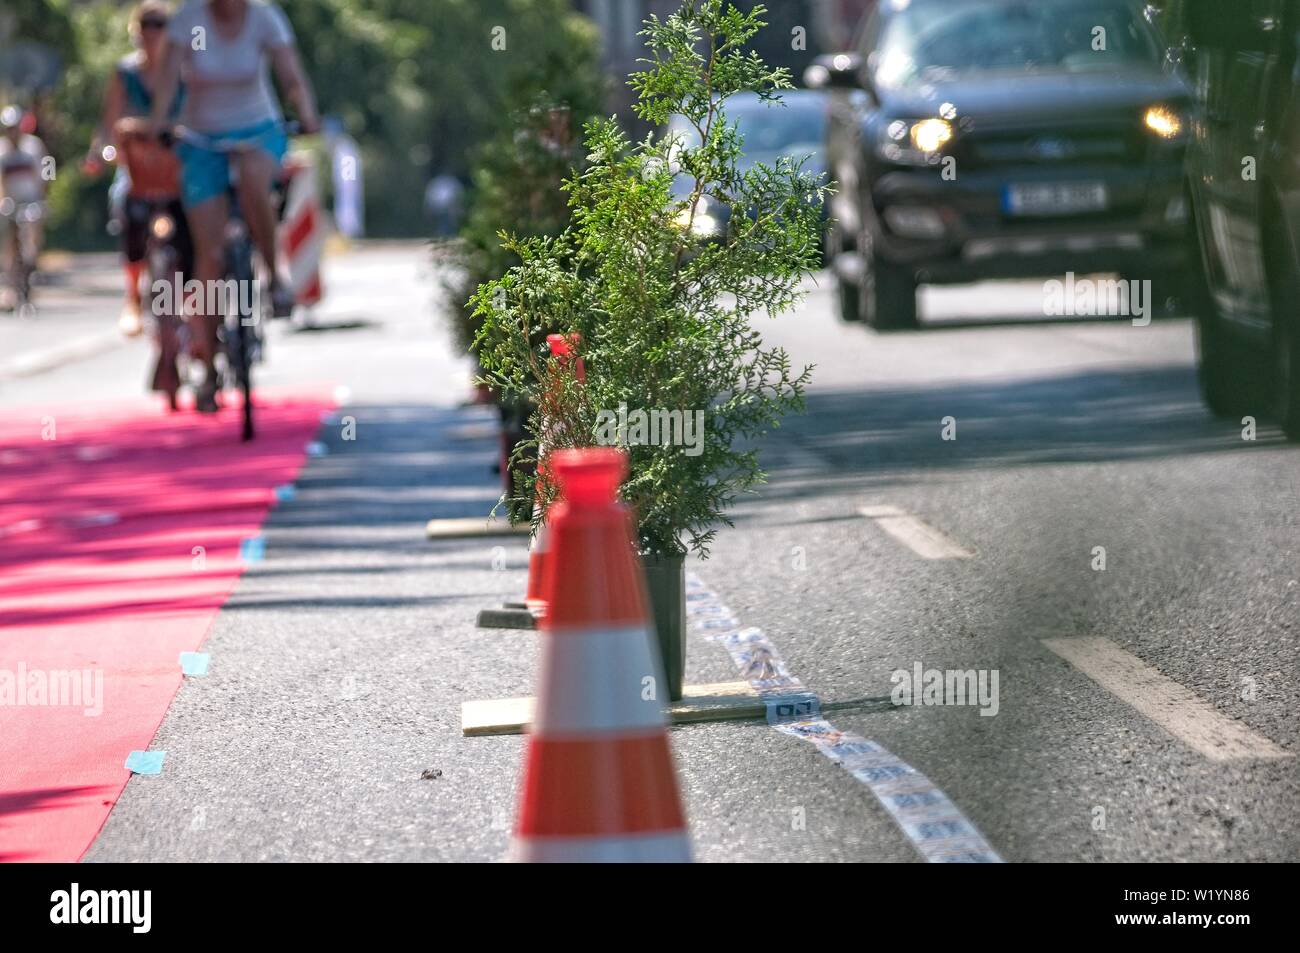 A protected bike lane separated from the traffic with pylons and plants Stock Photo